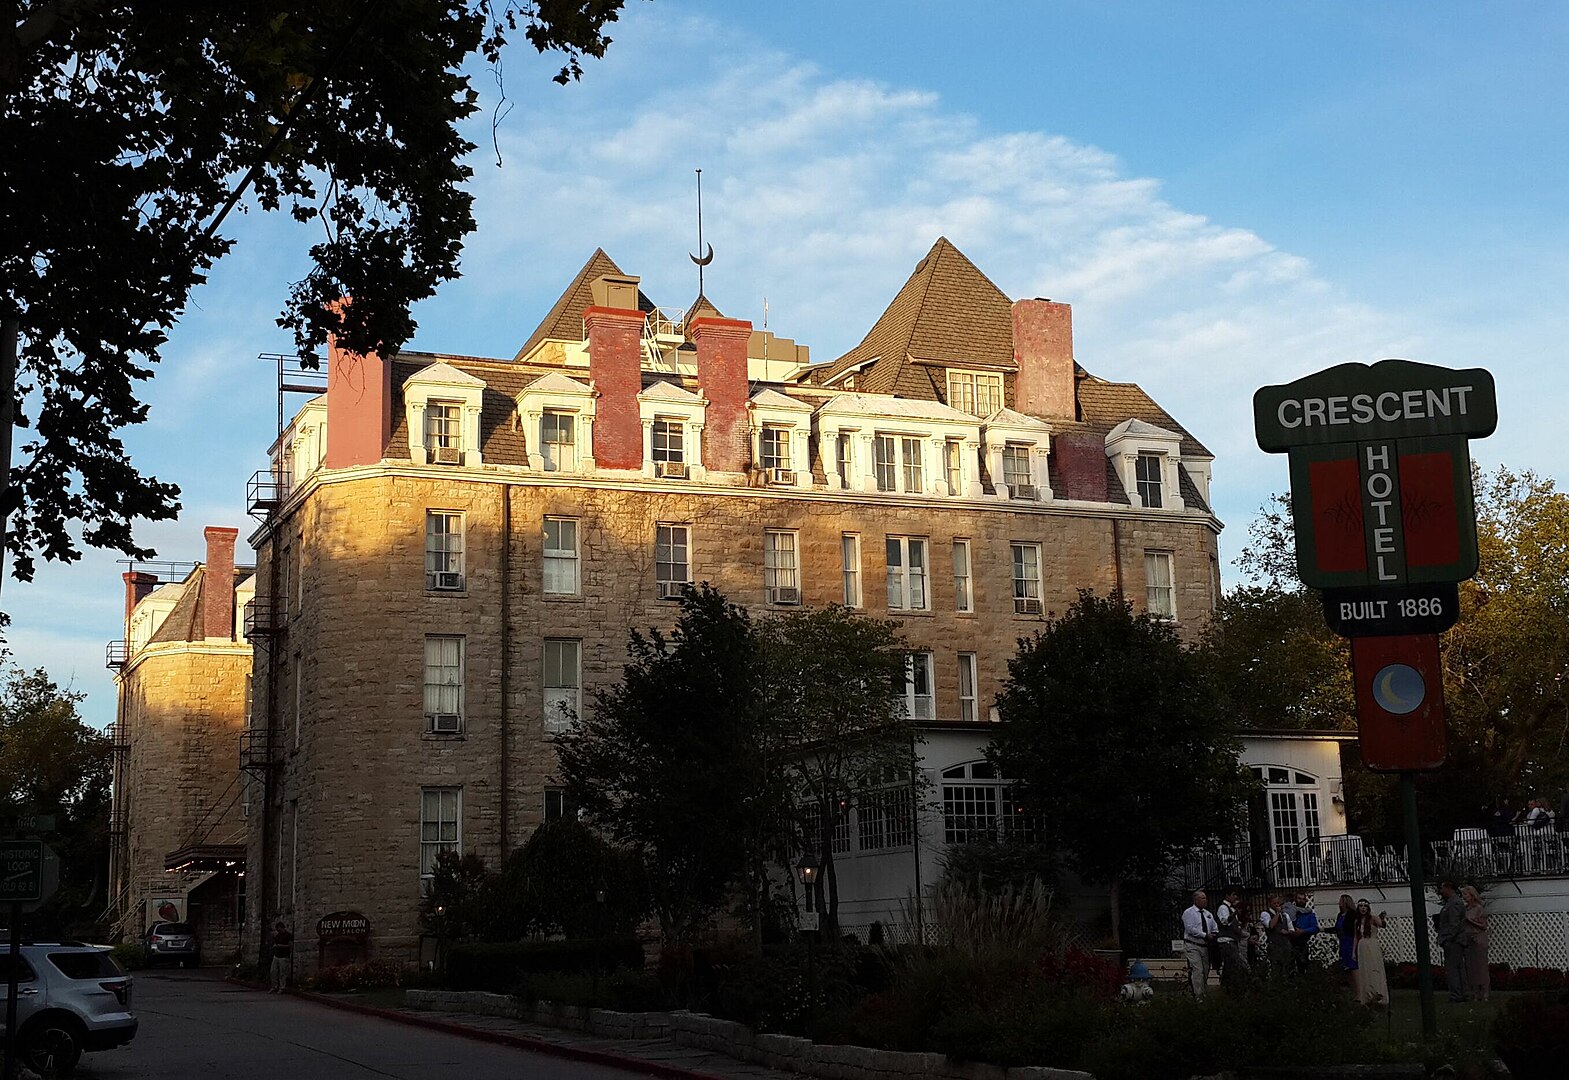 Known as the most haunted hotel in America, the Crescent Hotel was built during the 19th century. Located on the top of the Ozark Mountains, it was once a women’s college and a hospital. But today, the hotel is a permanent residence of the most famous ghost, Dr. Norman Baker, who once operated a cancer care hospital here.